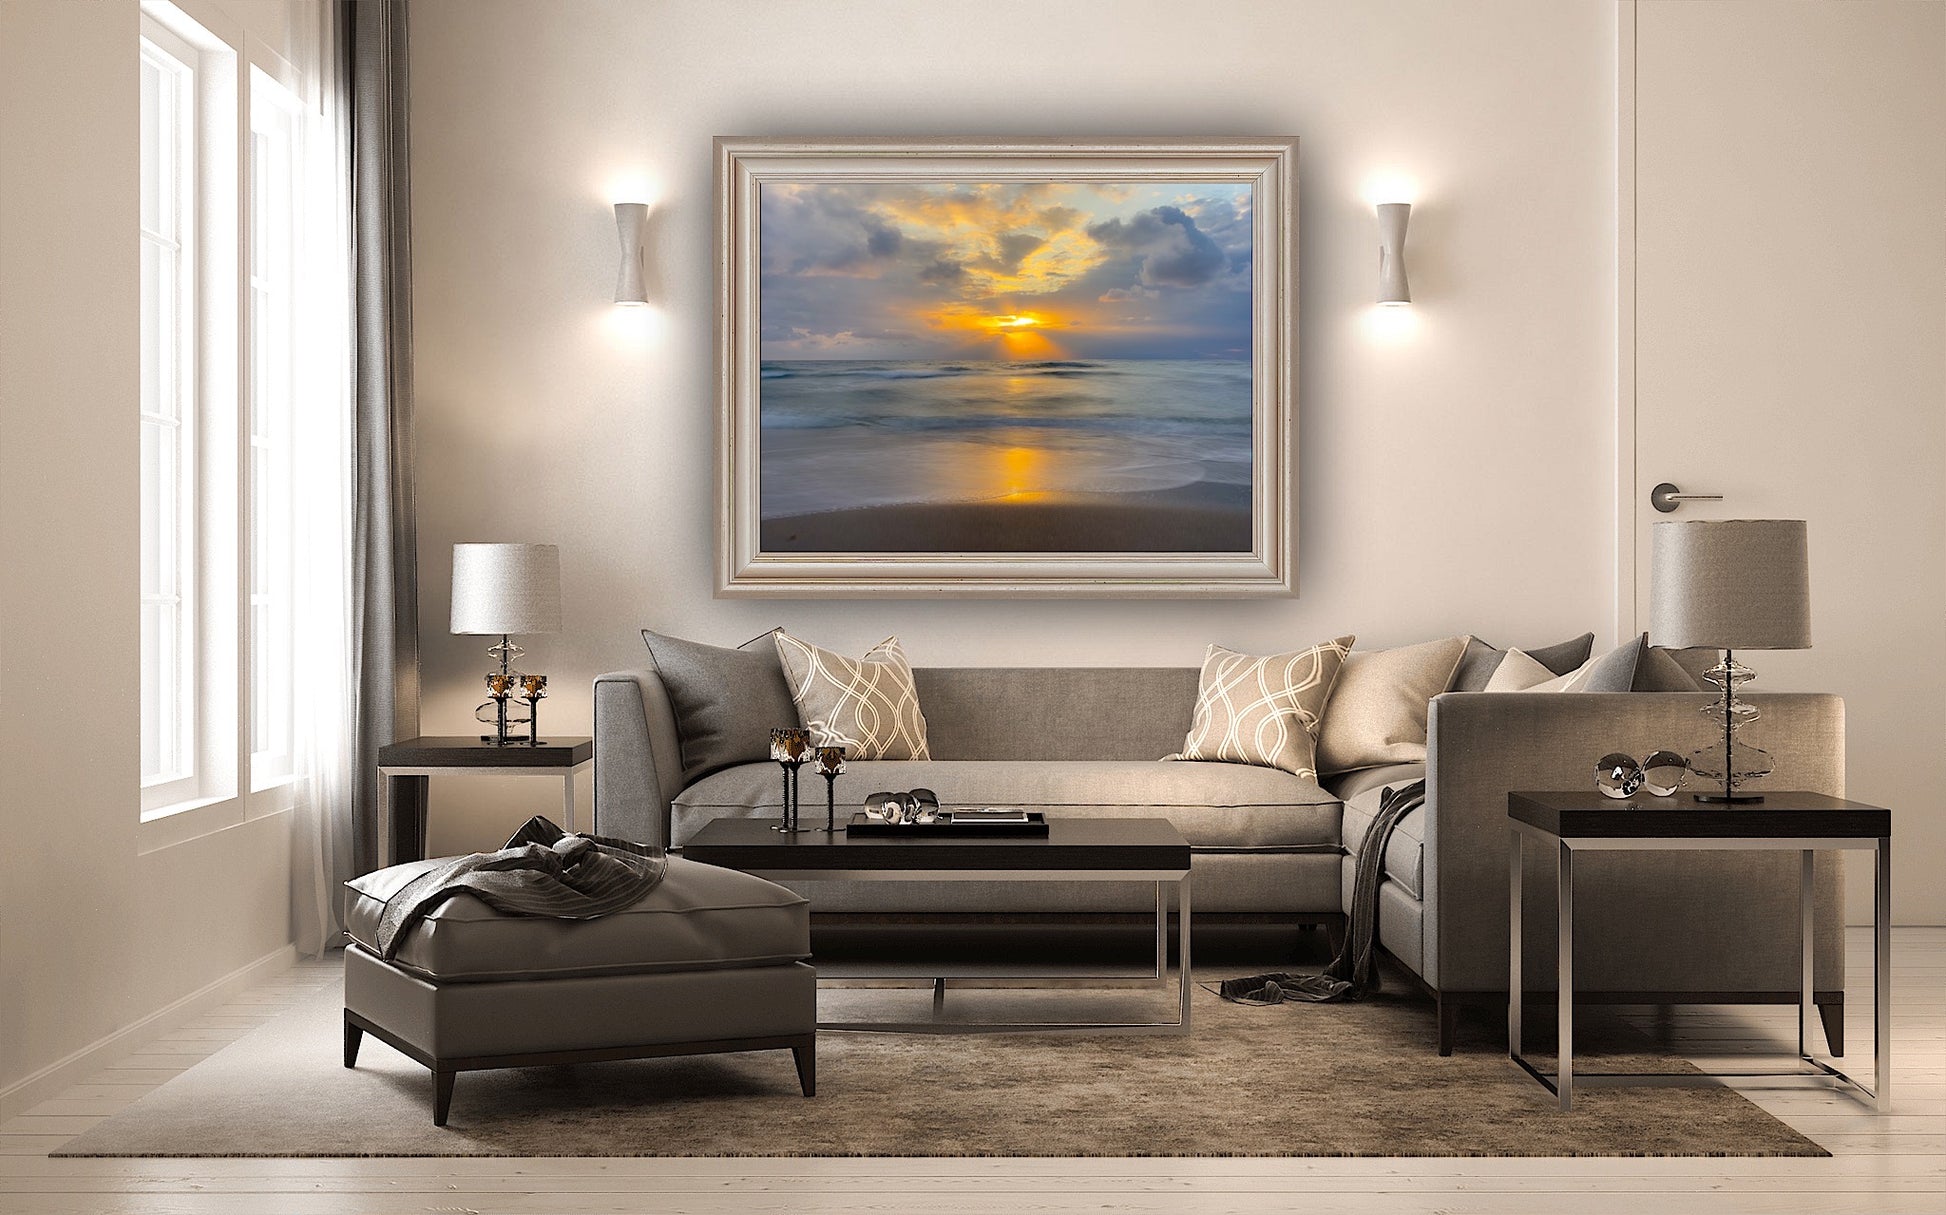 Reflections of a sunrise canvas print family room decor 